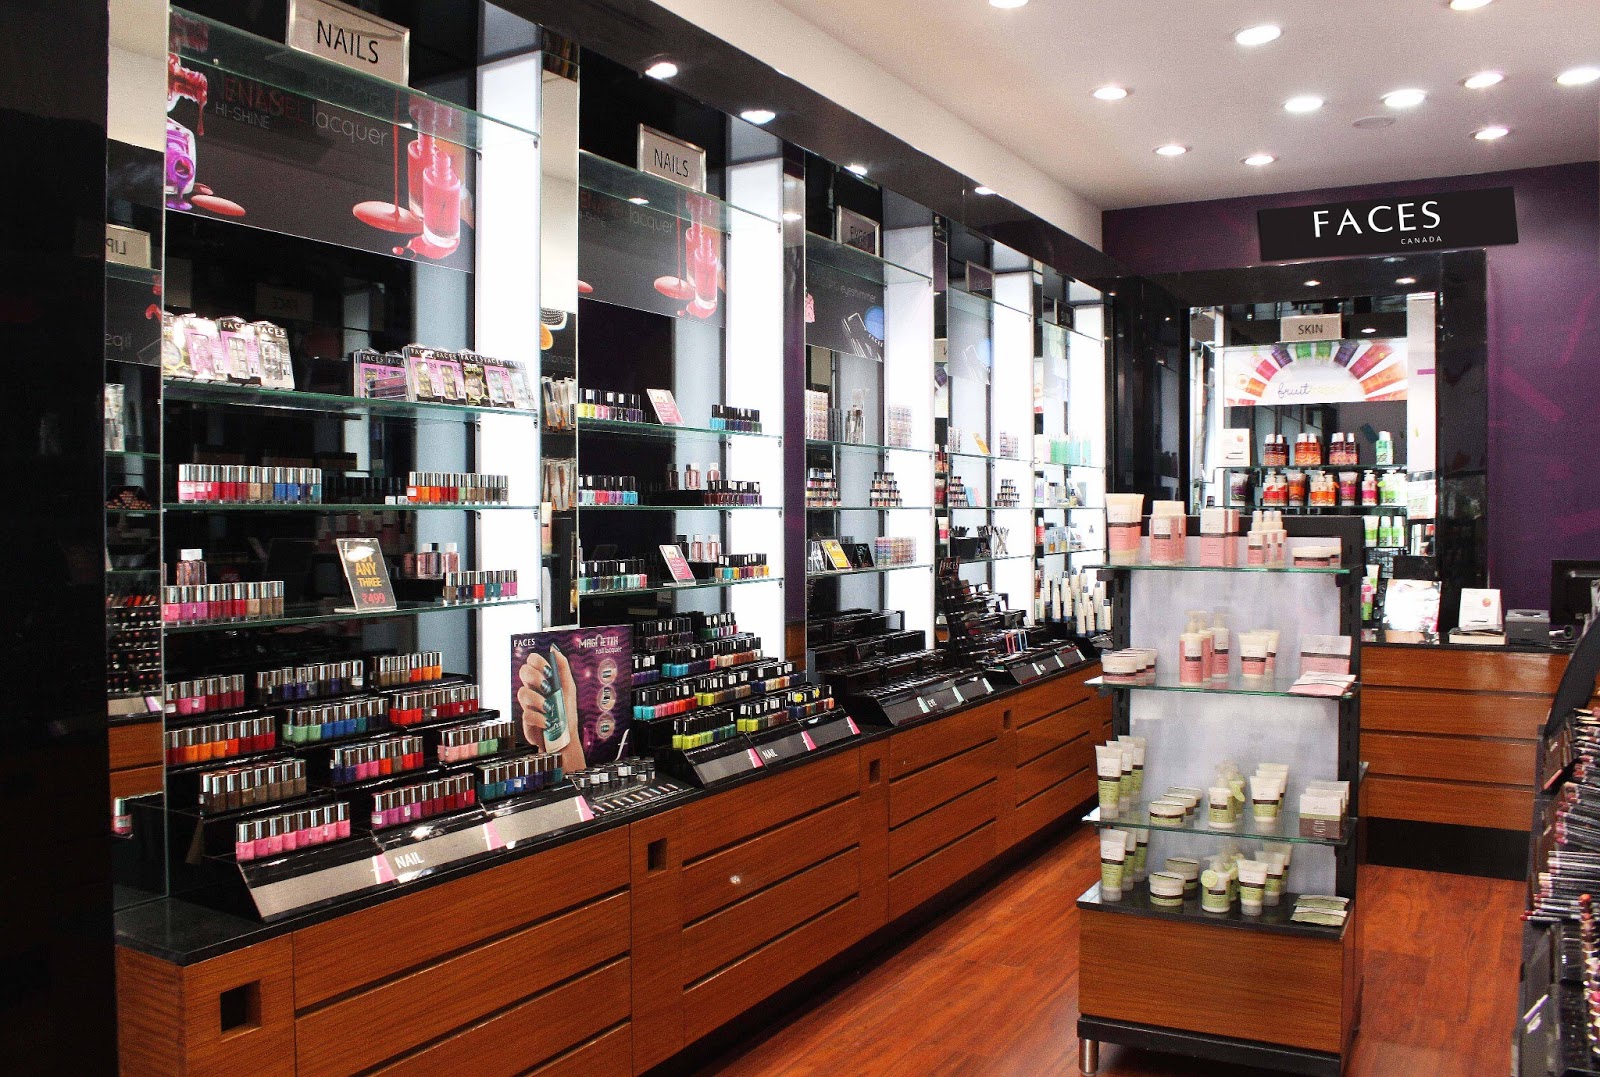 dræne Udveksle nakke Faces Canada Opens Exclusive Store at Delhi ~ Details and Photos - Blog  beauty care | Beauty is art